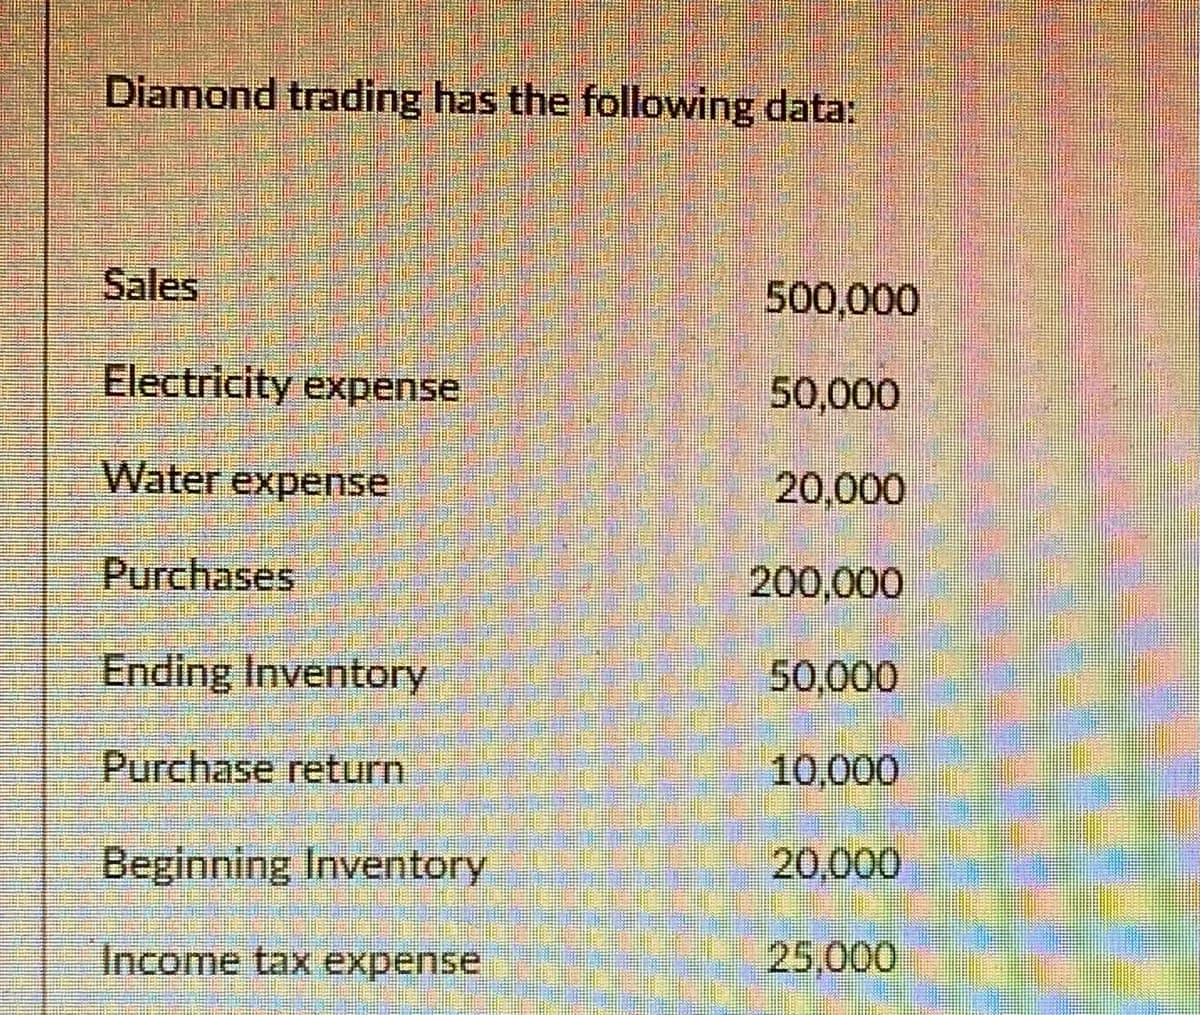 Diamond trading has the following data:
Sales
500,000
Electricity expense
50,000
Water expense
20,000
Purchases
200,000
Ending Inventory
50,000
Purchase return
10,000
Beginning Inventory
20,000
Income tax expense
25,000
